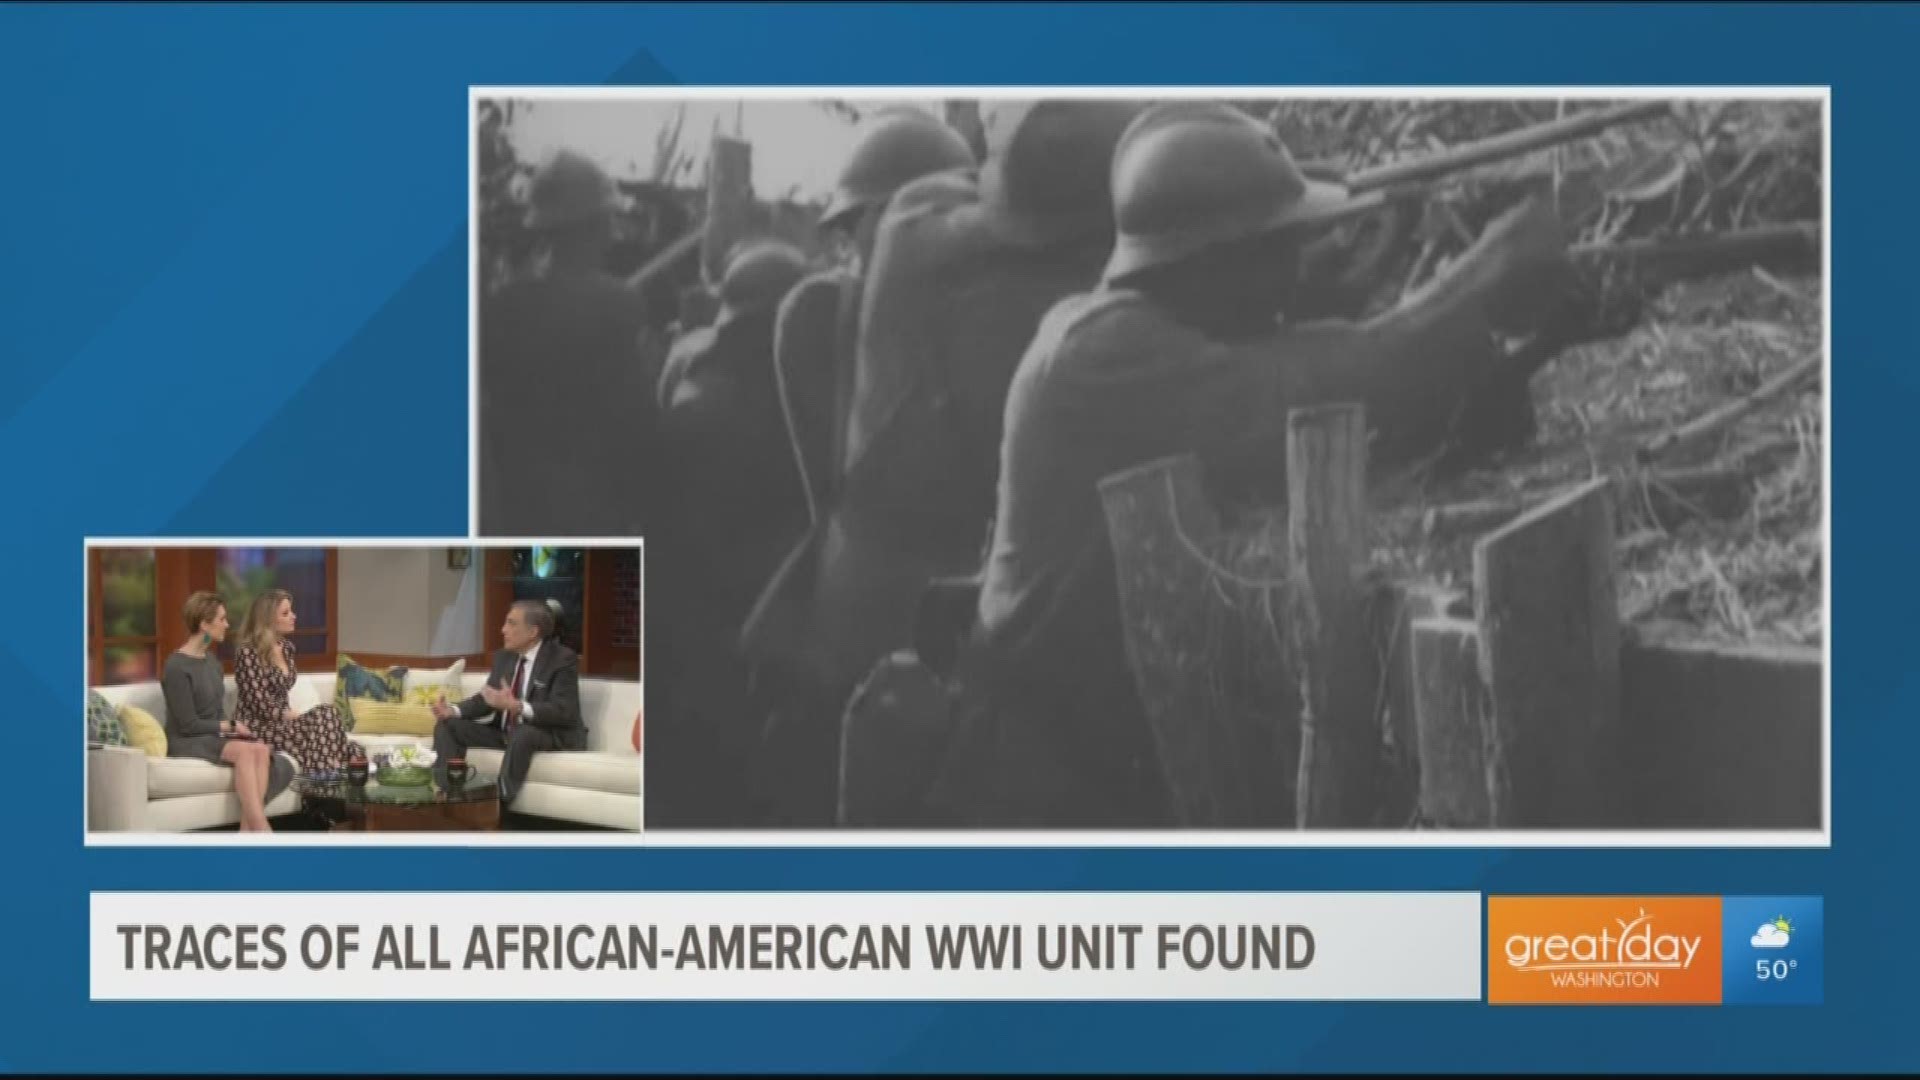 ER physician &National Geographic photographer Dr. Jeff Gusky found the only WWI all African-American combat unit, the exhibit is on display at the Smithsonian.